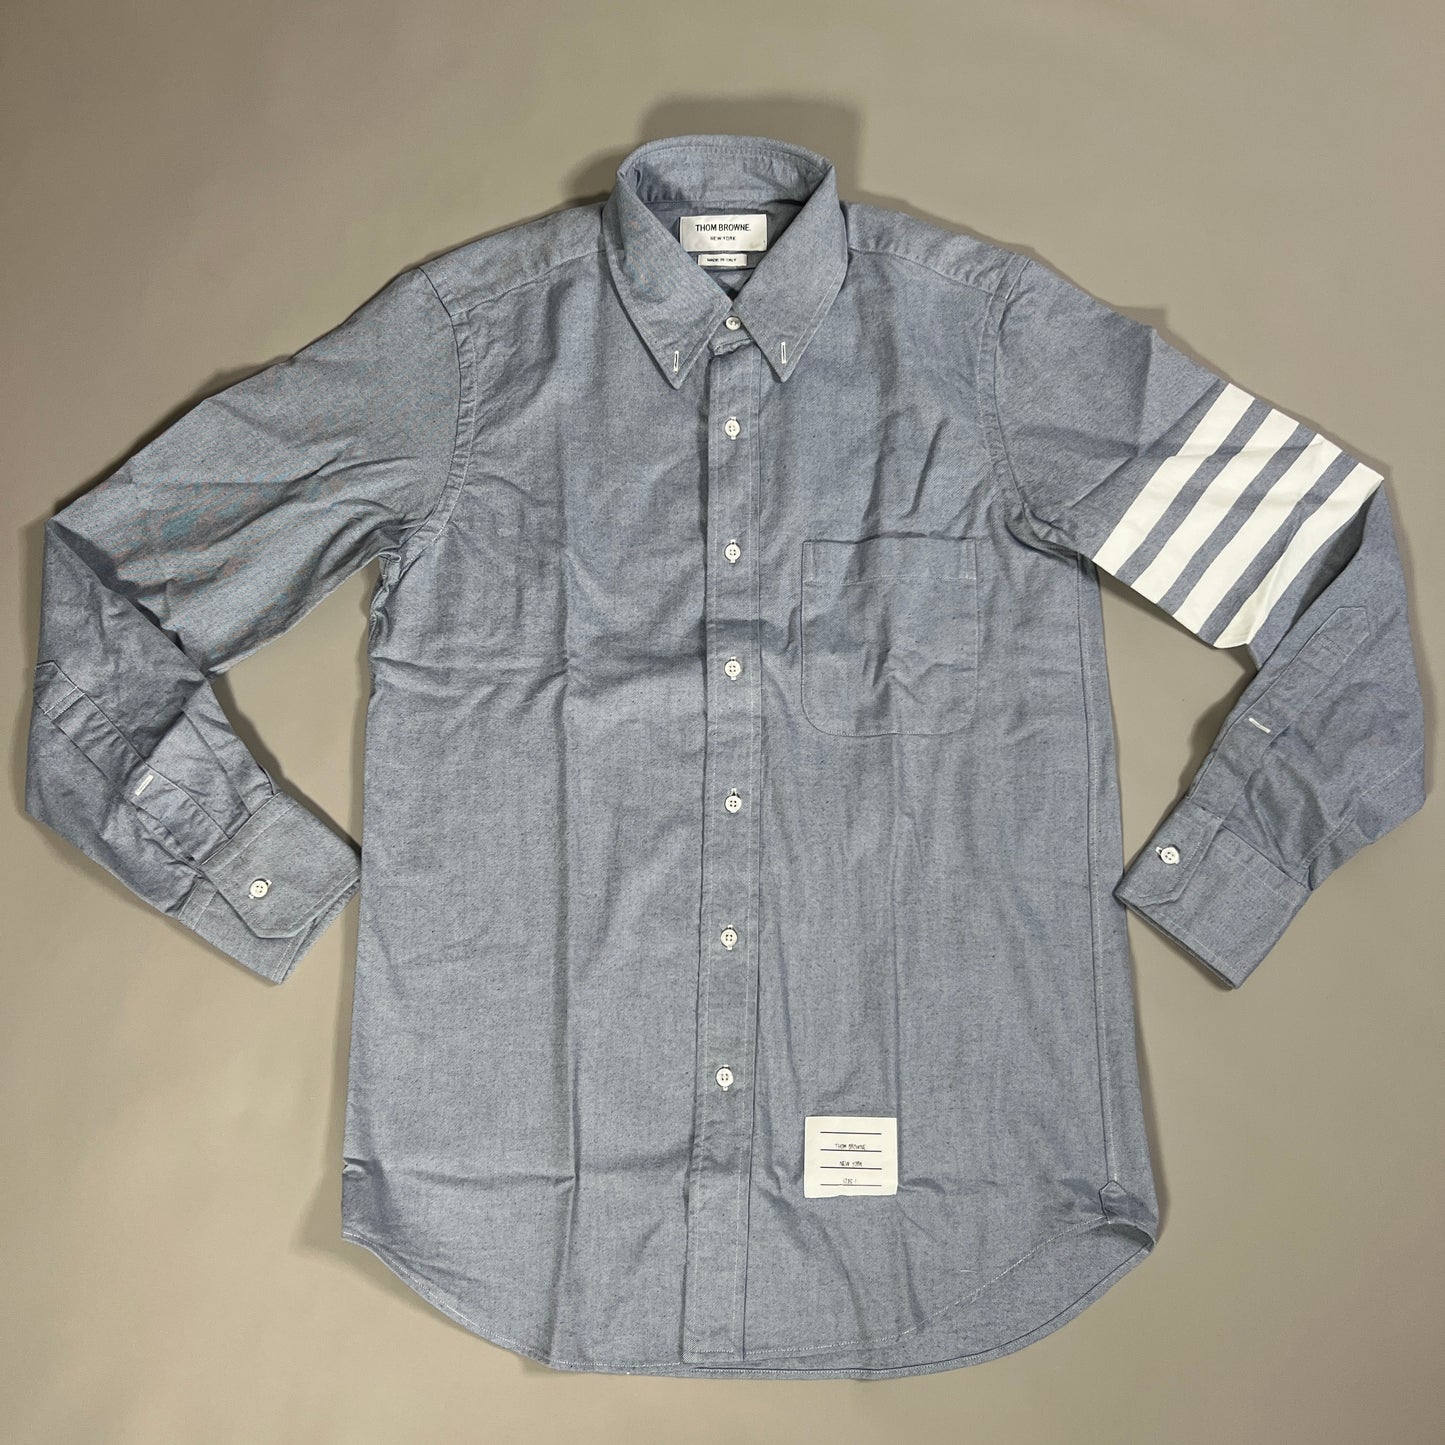 THOM BROWNE Straight Fit BD LS Shirt w/CB RWB GG in Solid Flannel w/woven 4 Bar Stripe in Light Blue Size 1 (NEW)